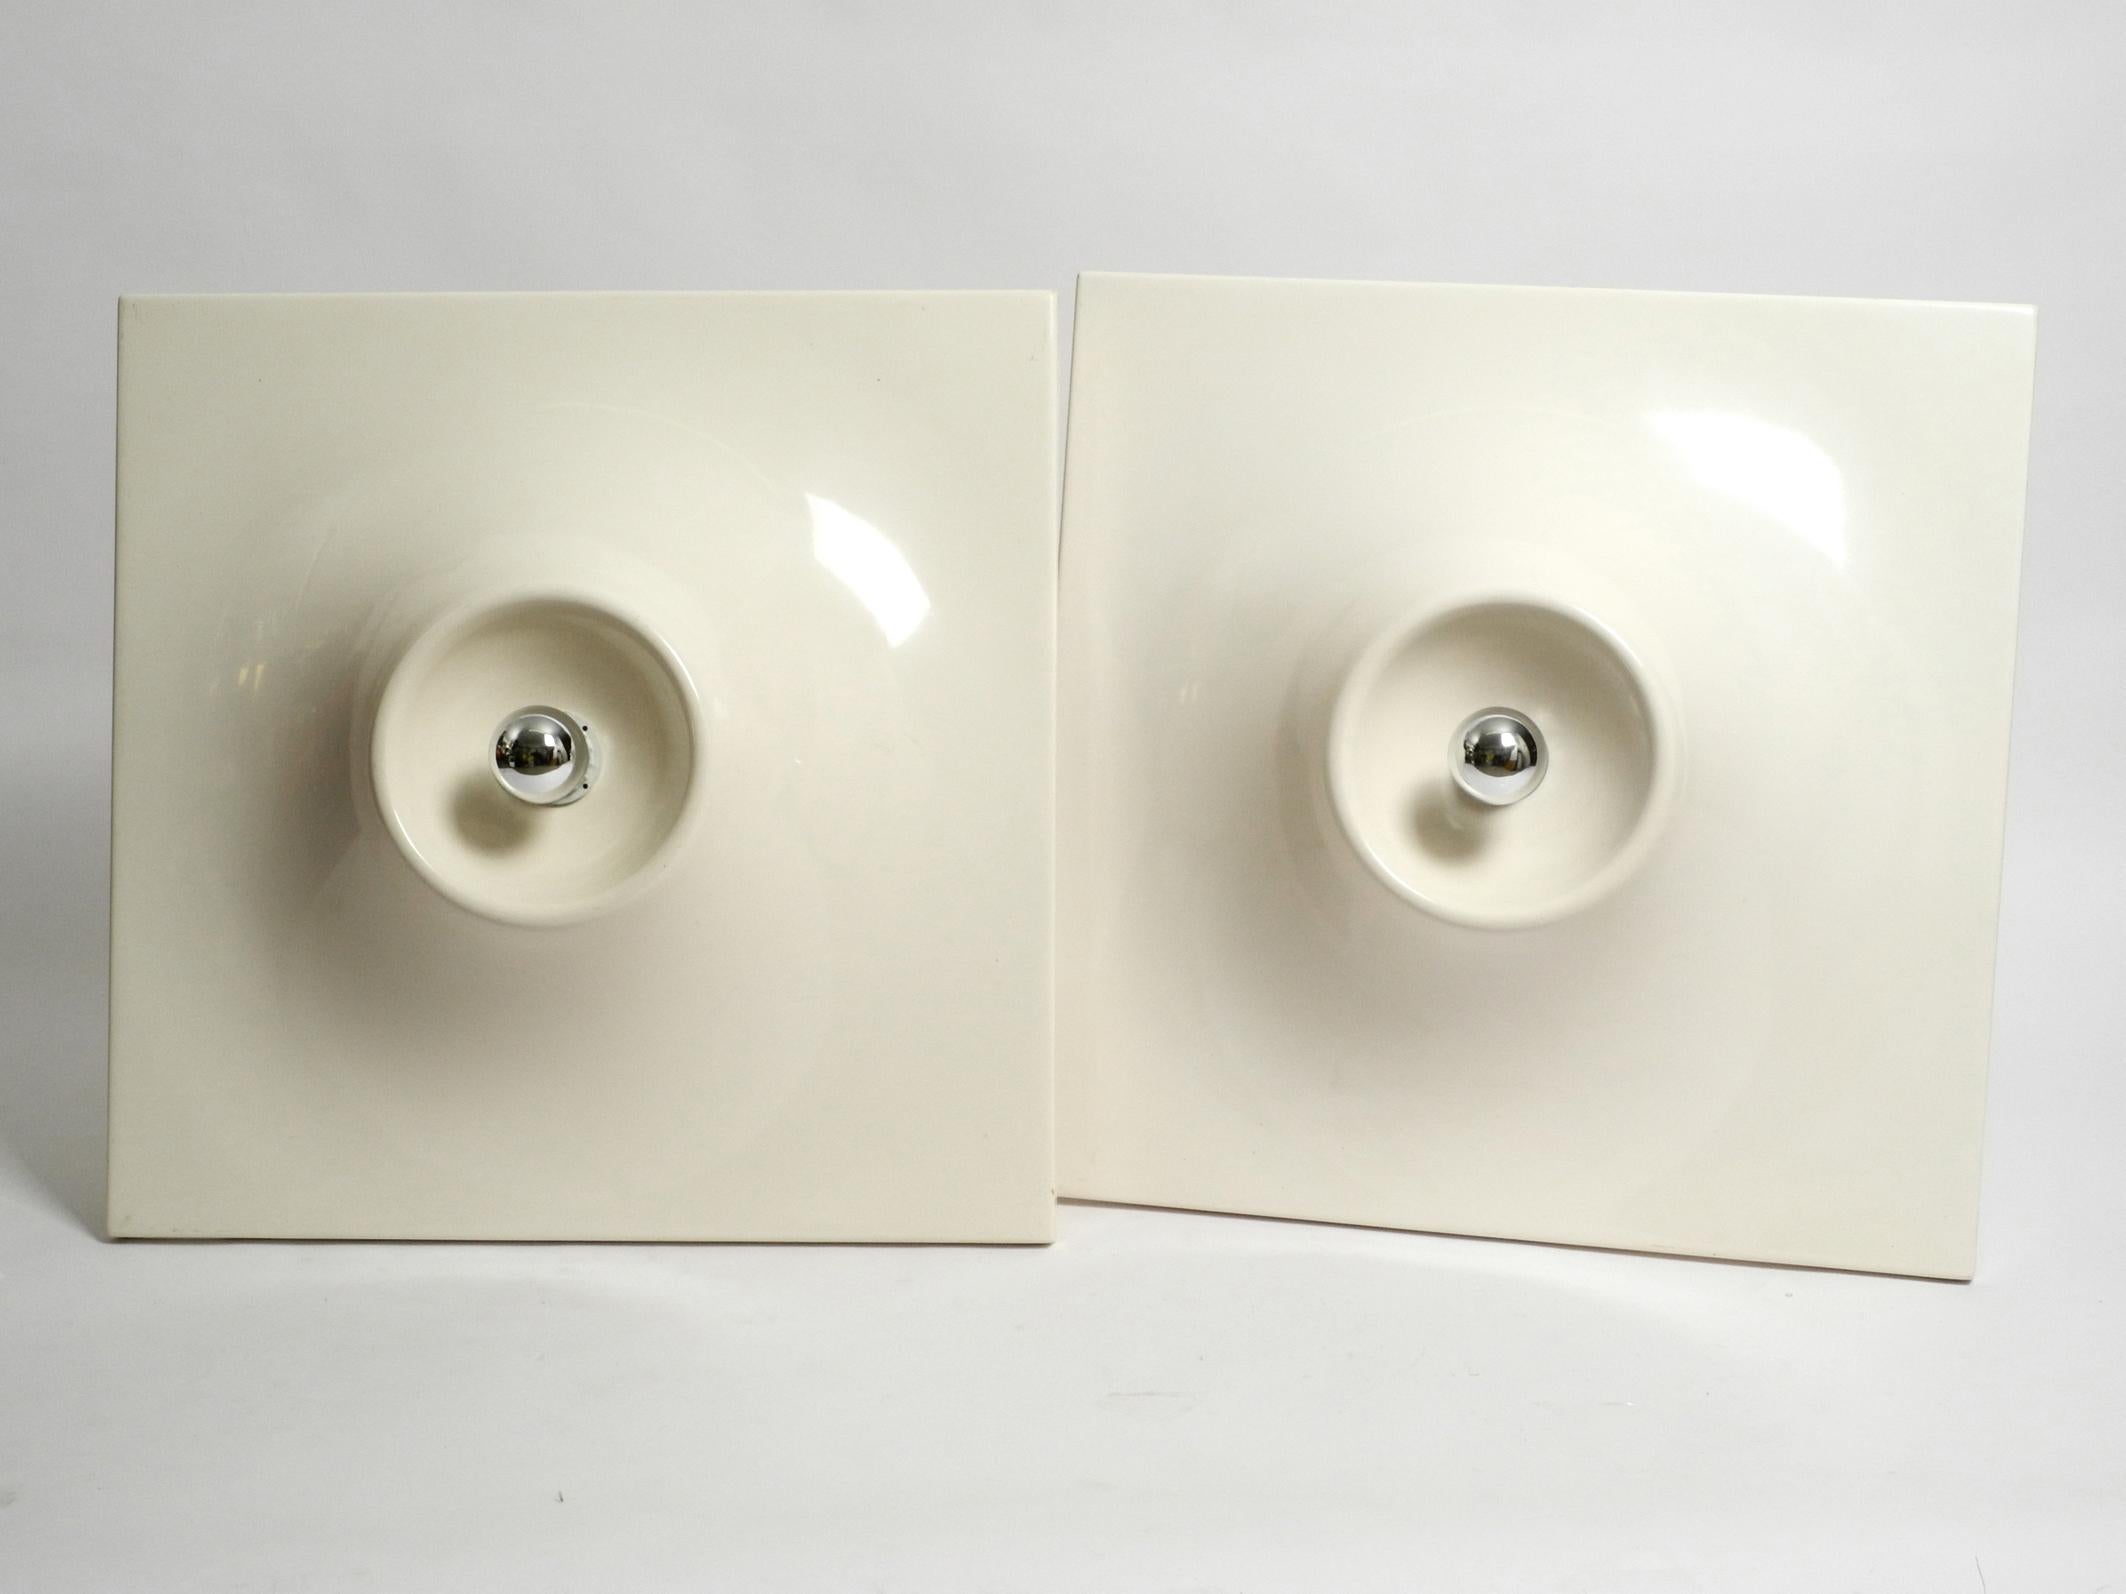 Two very large square 1960s Space Age wall or ceiling lamps.
The lamps are made of polyurethane and are painted in beige white.
Made in Germany. Beautiful Minimalist Space Age design.
With mirrored bulbs it creates a very nice glare-free